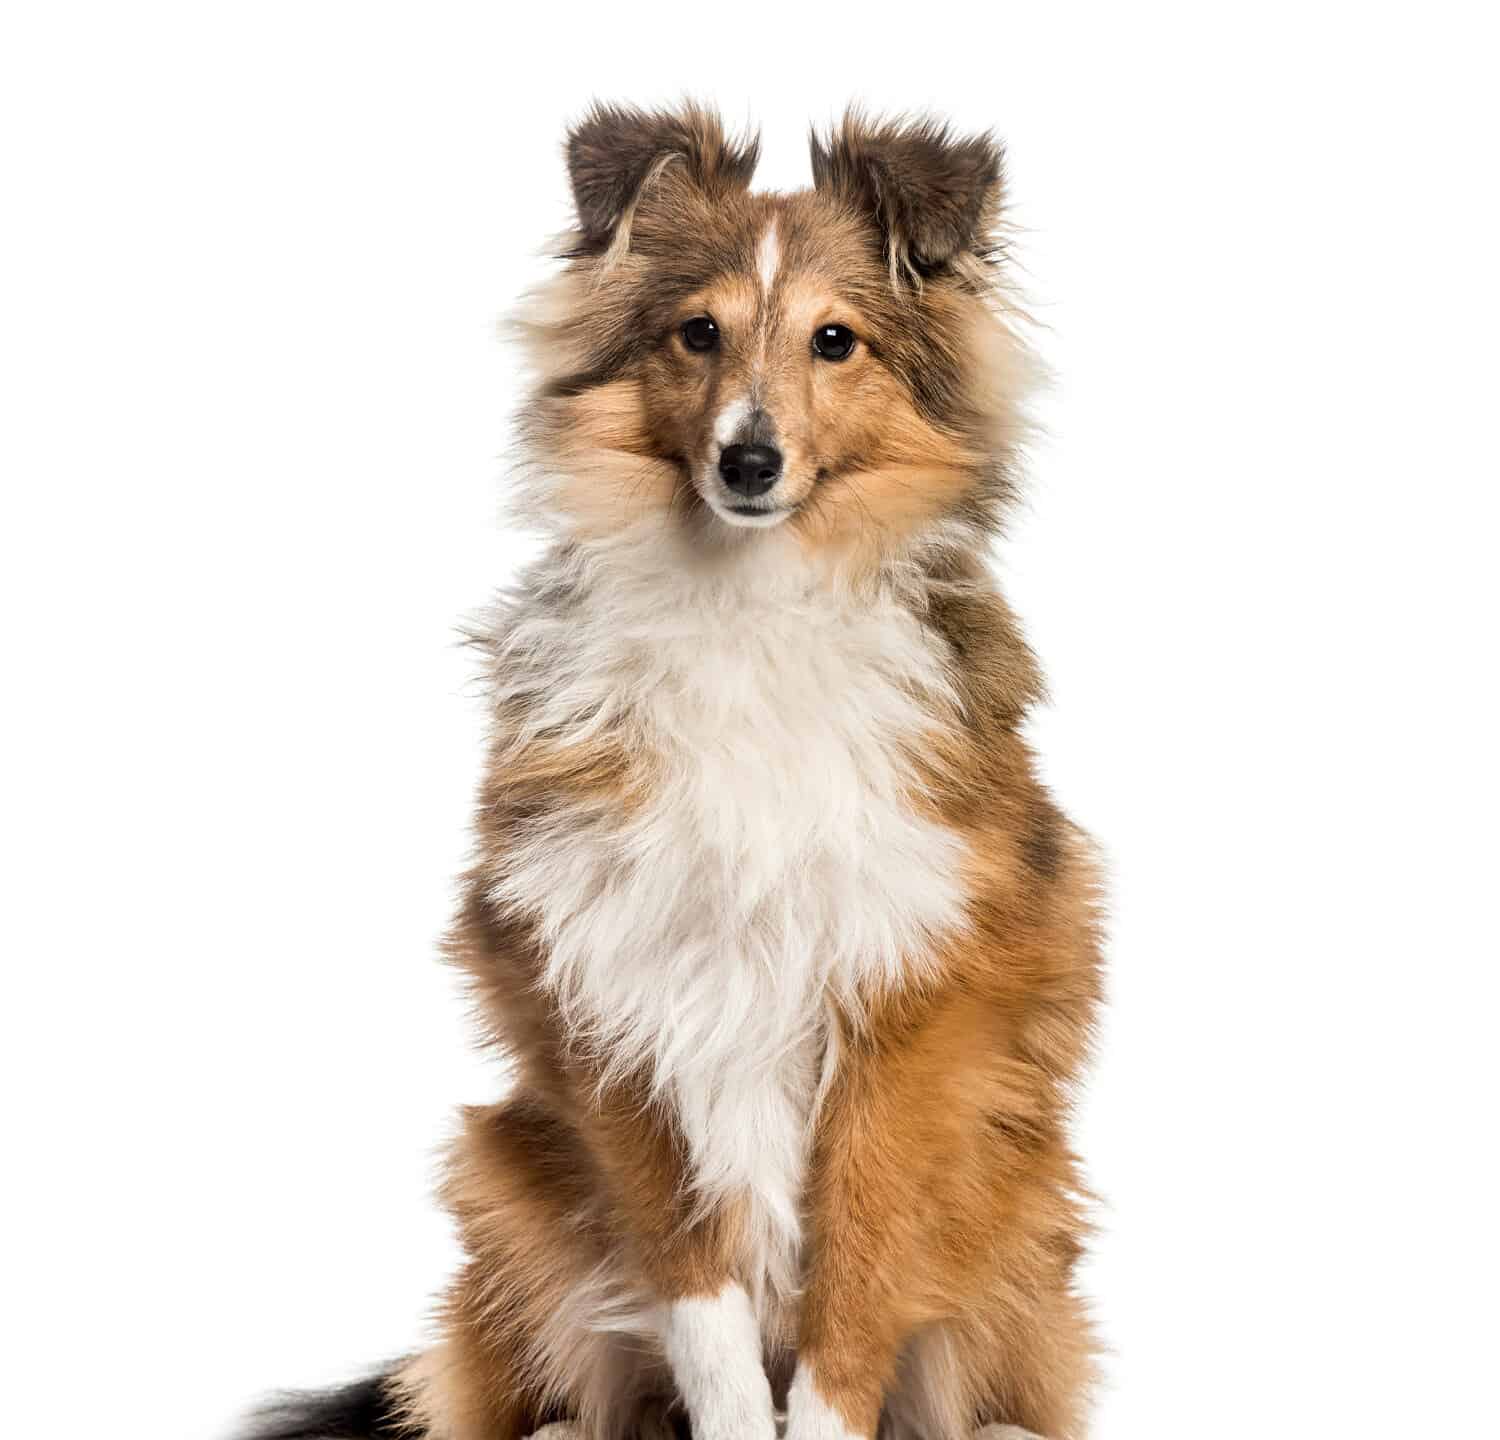 Shetland Sheepdog, 3 years and 6 months old, sitting in front of white background